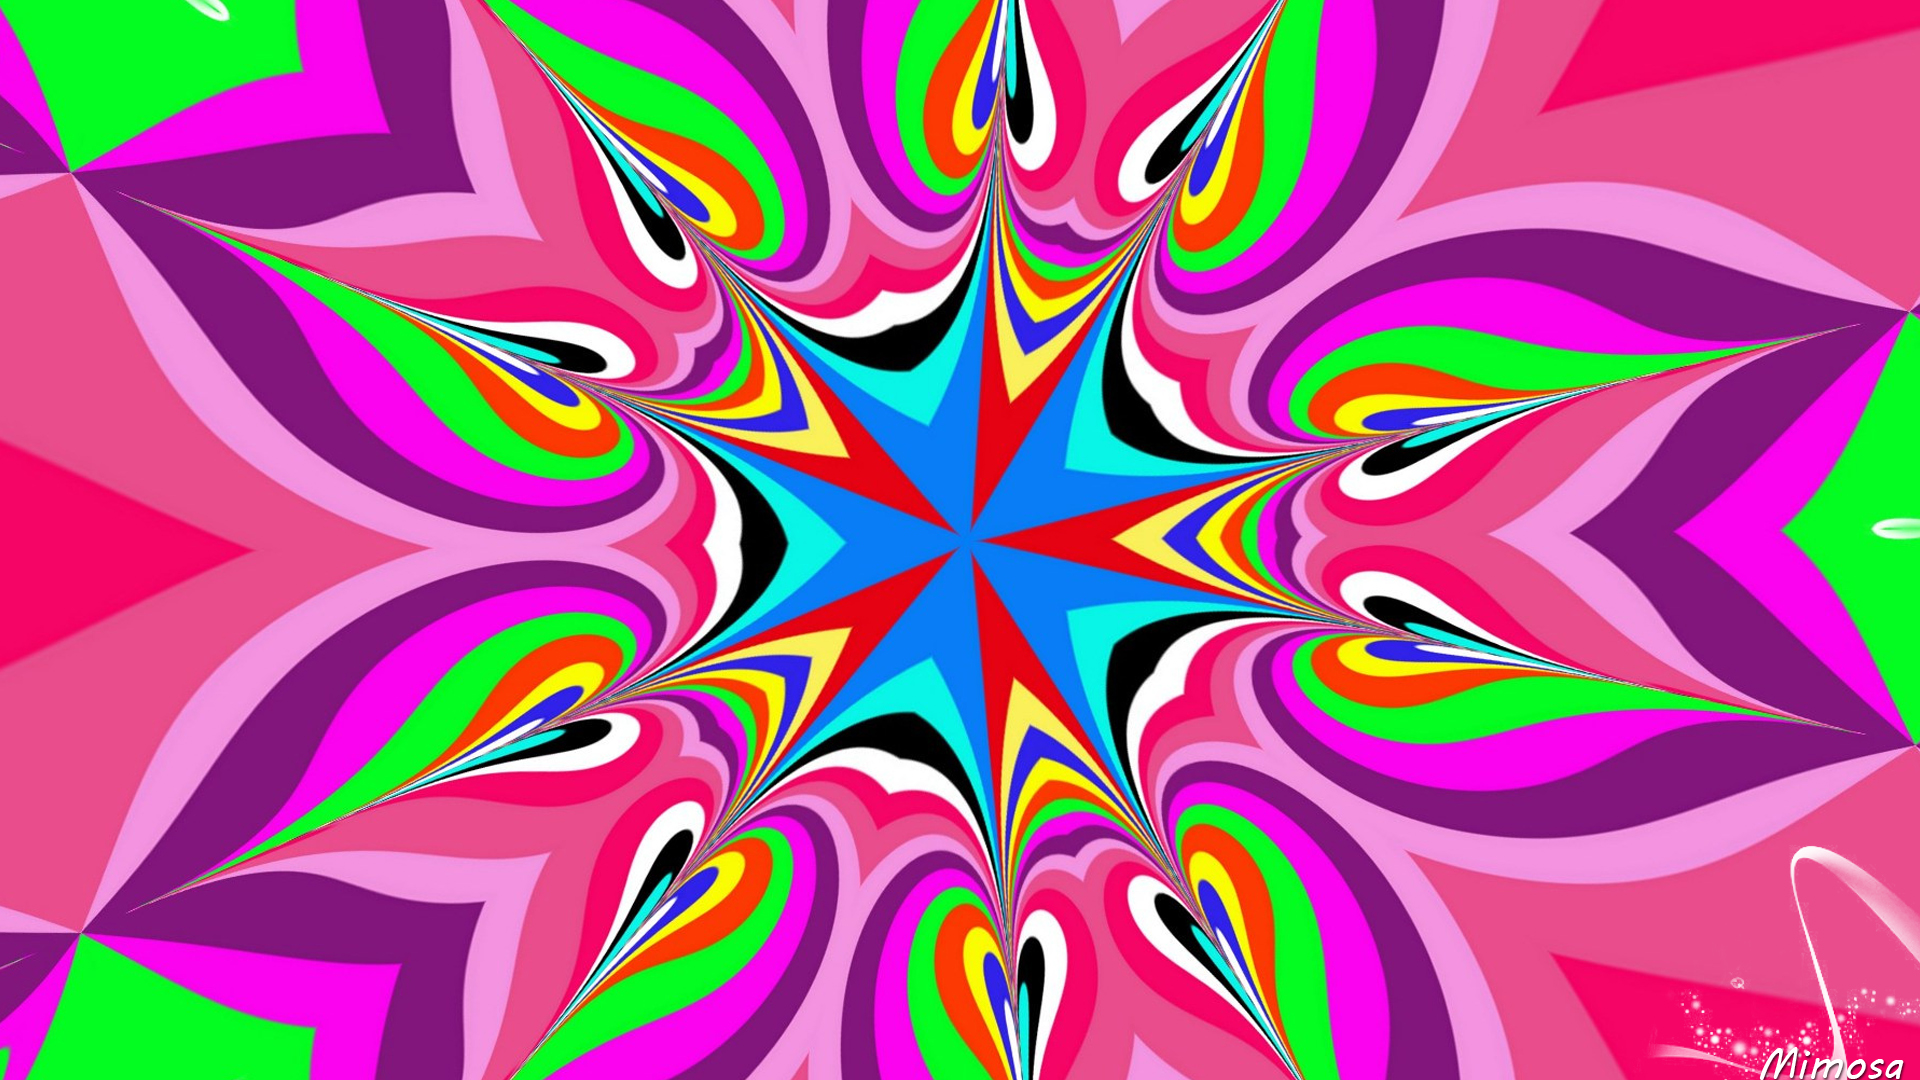 Abstract Artistic Colorful Colors Digital Art Kaleidoscope Pattern 1920x1080